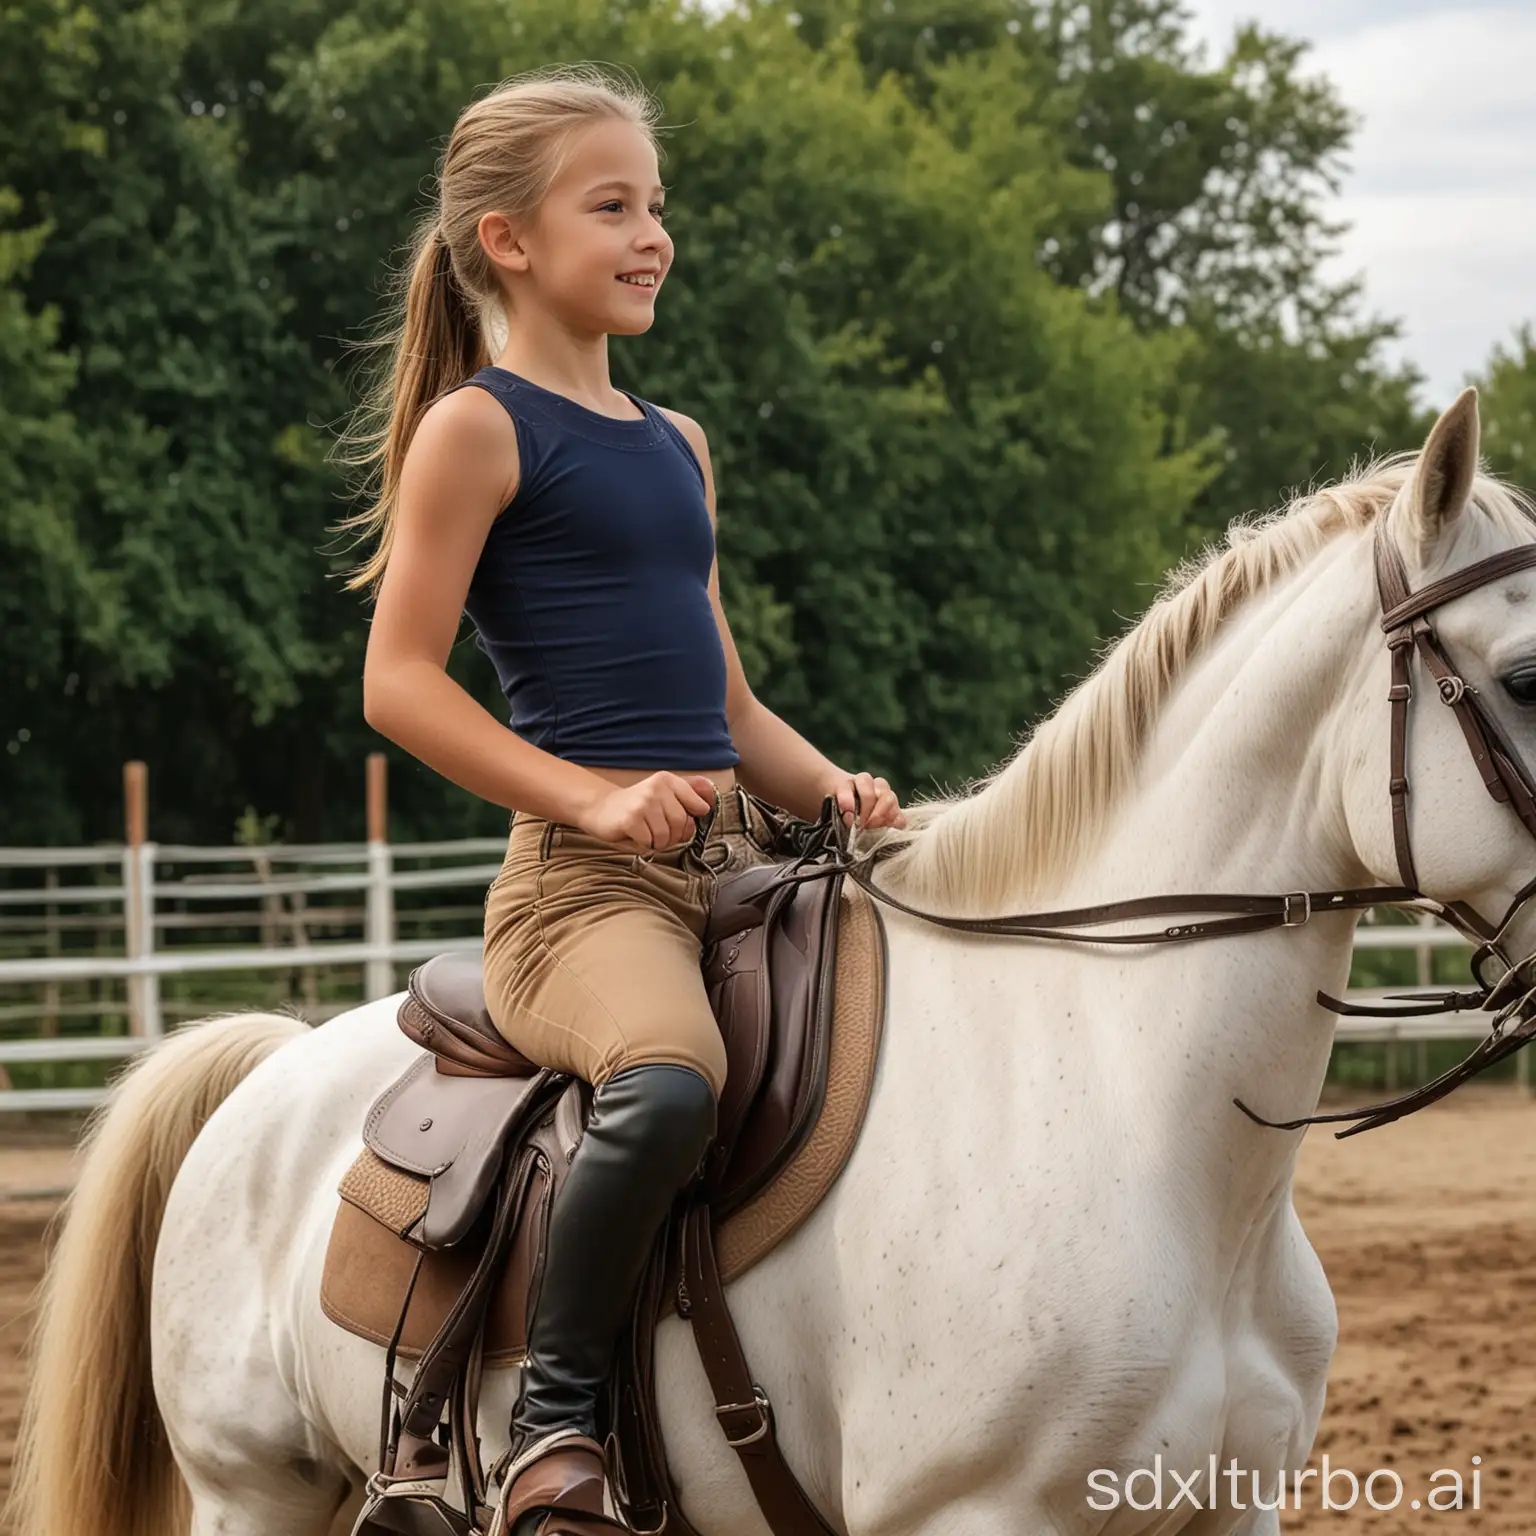 A 10-year-old girl is riding a horse bareback, wearing a crop top and tight jodhpurs. The perspective is from the side of the horse